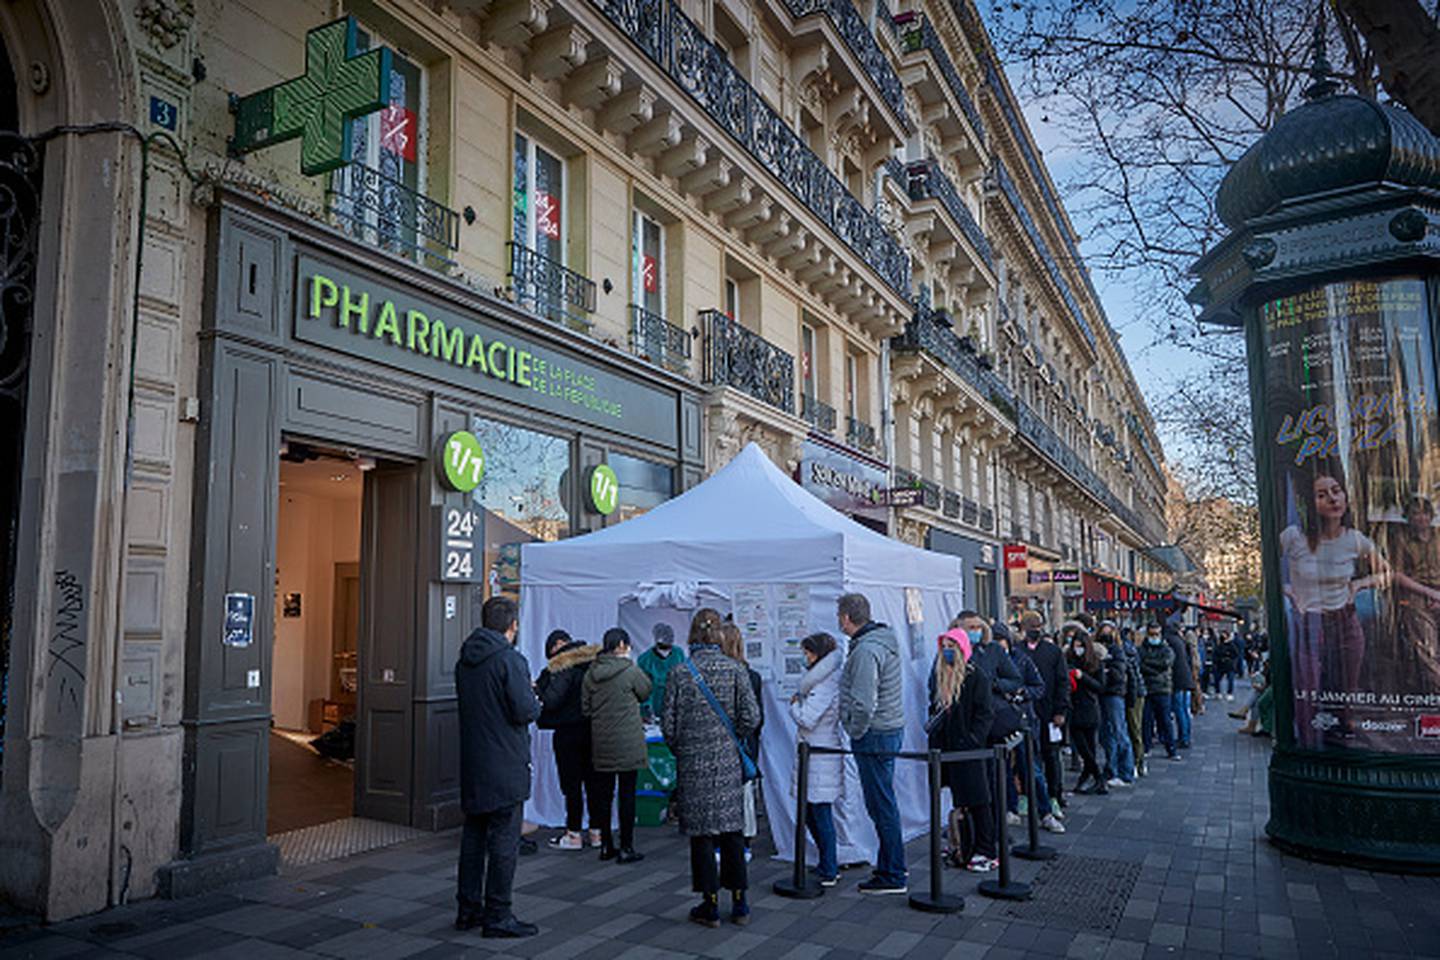 Long queues greet Parisians as they queue up for Covid-19 testing on New Year's Day at a pharmacy at Place de la Republique on January 01, 2022 in Paris, France. Photo / Getty Images